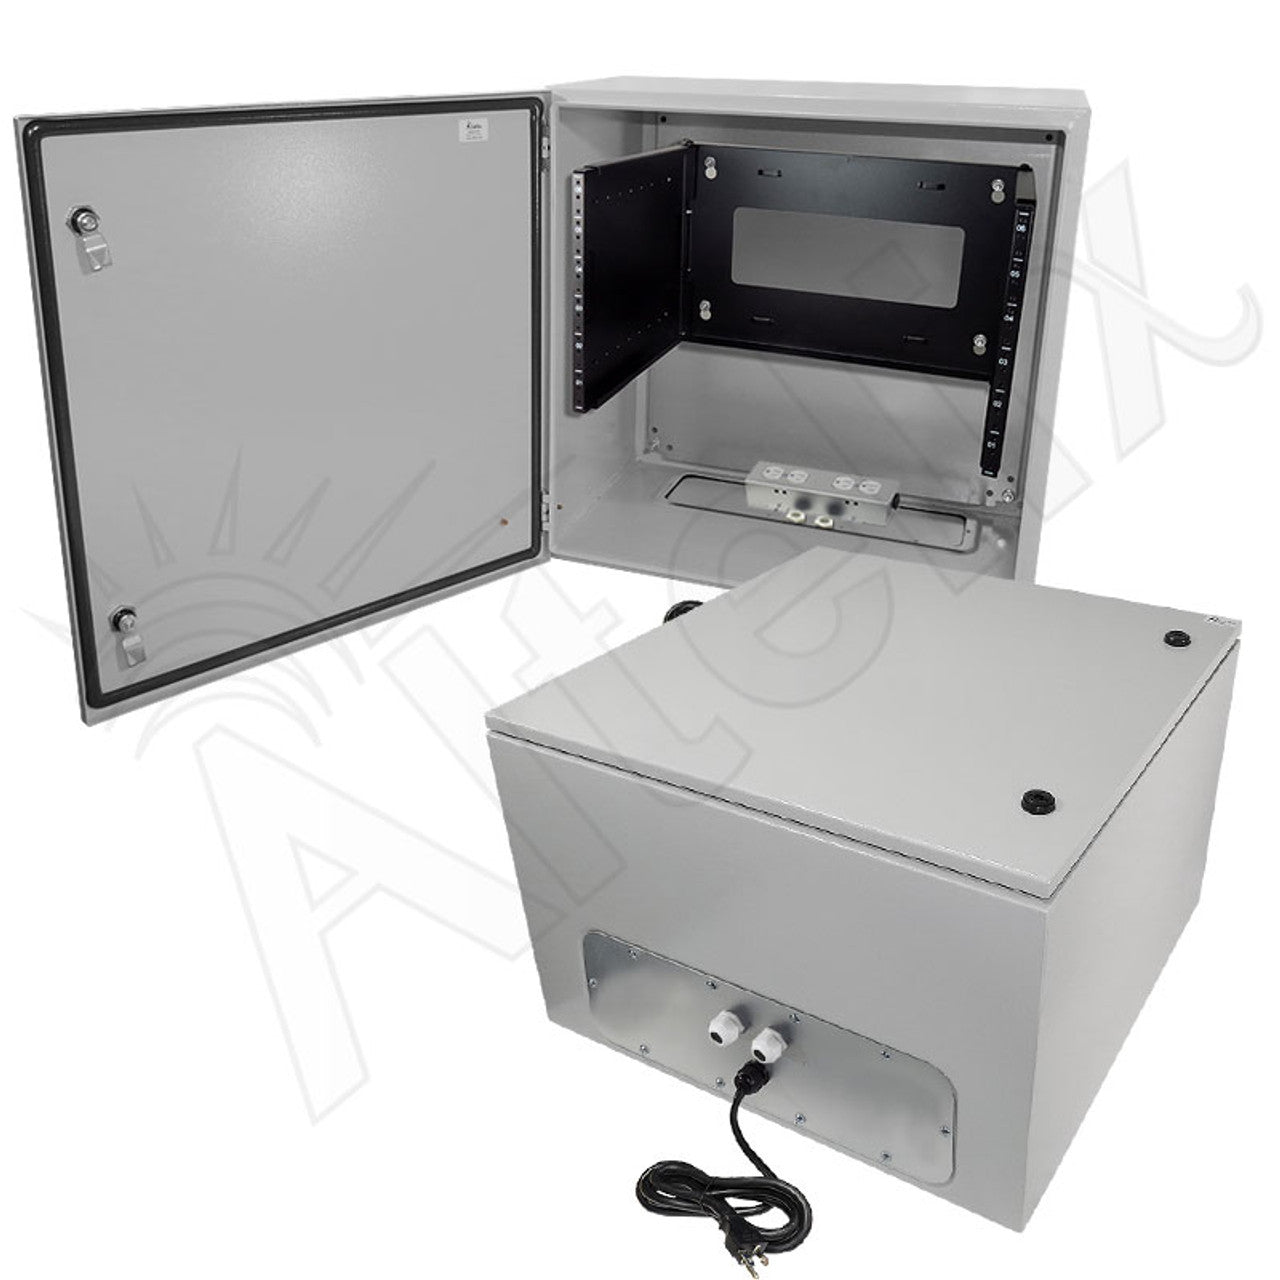 Altelix 120VAC 20A Steel NEMA 4X Enclosure for UPS Power Systems with 19" Wide 6U Rack, 20A Power Outlets and Power Cord-3